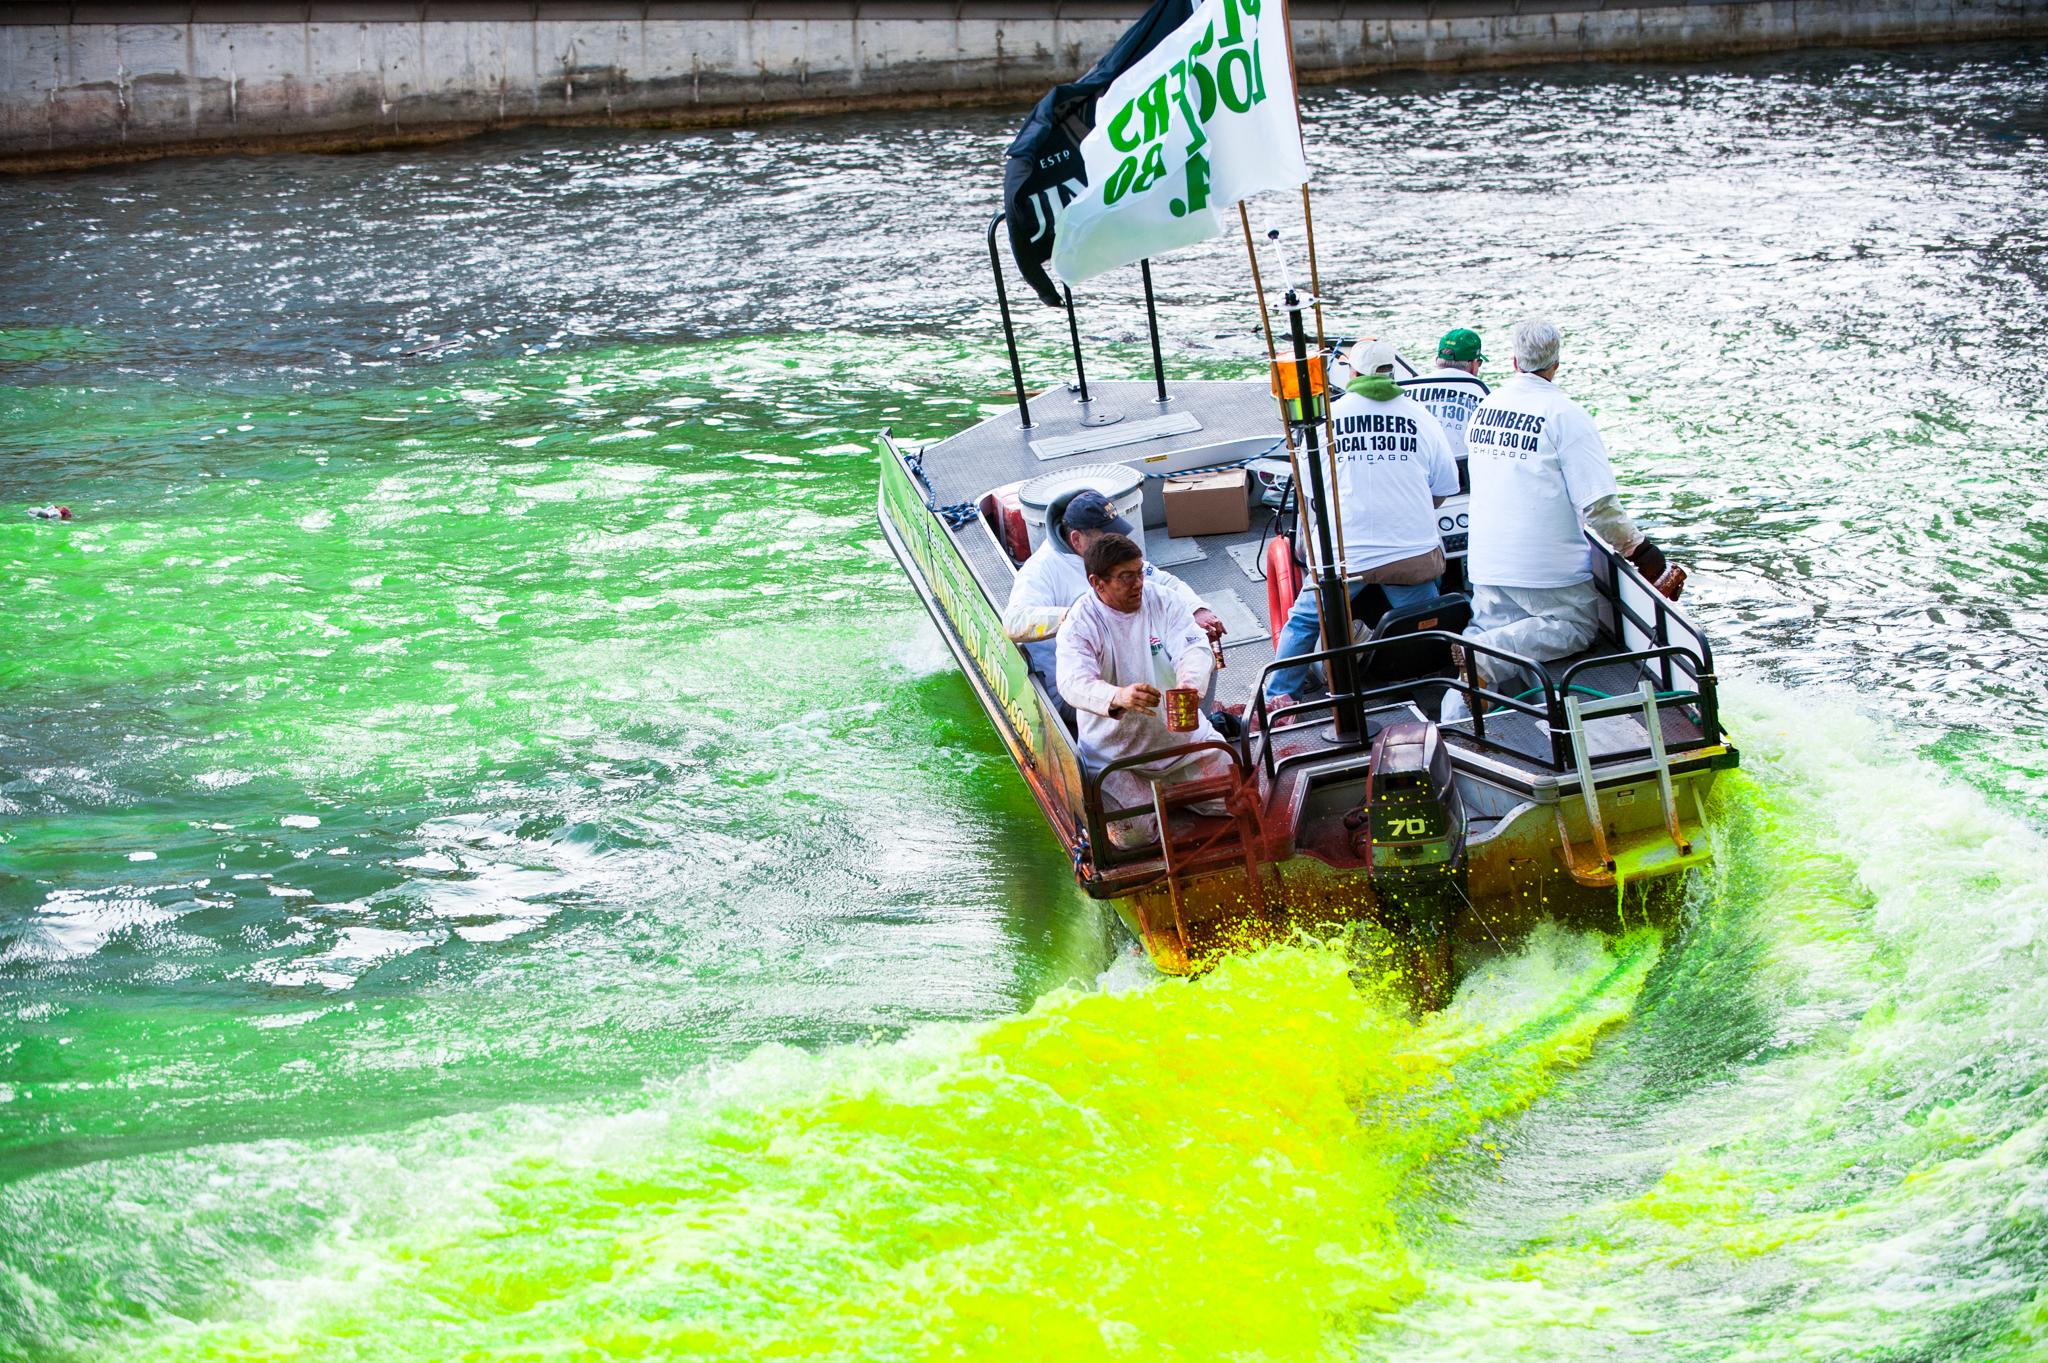 Chicago River runs green in annual St. Patrick's Day tradition